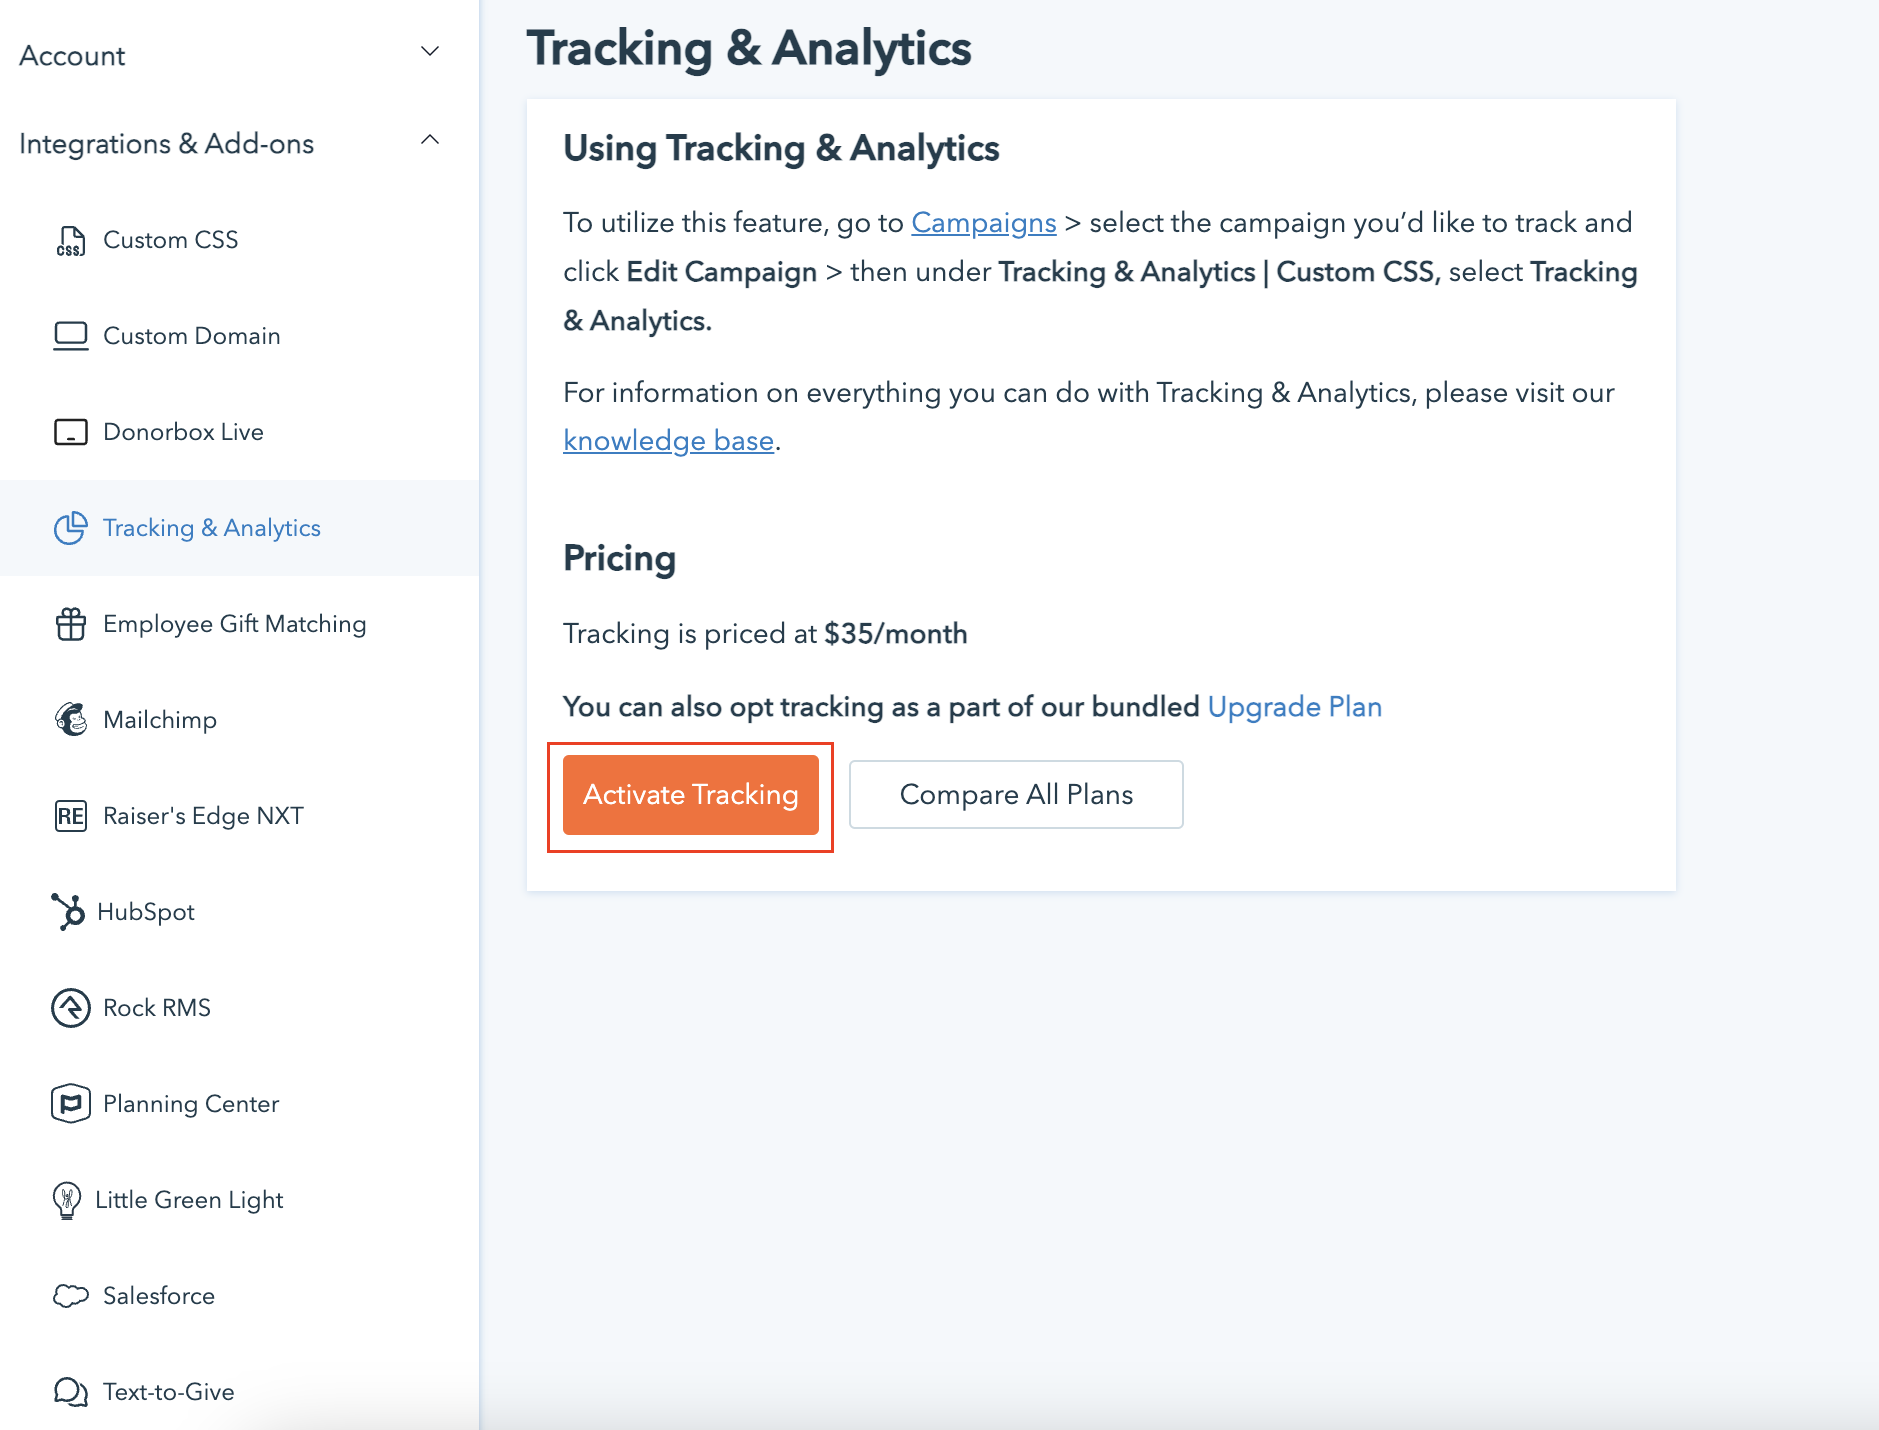 Screenshot shows where to locate the activation for Donorbox Tracking & Analytics. 